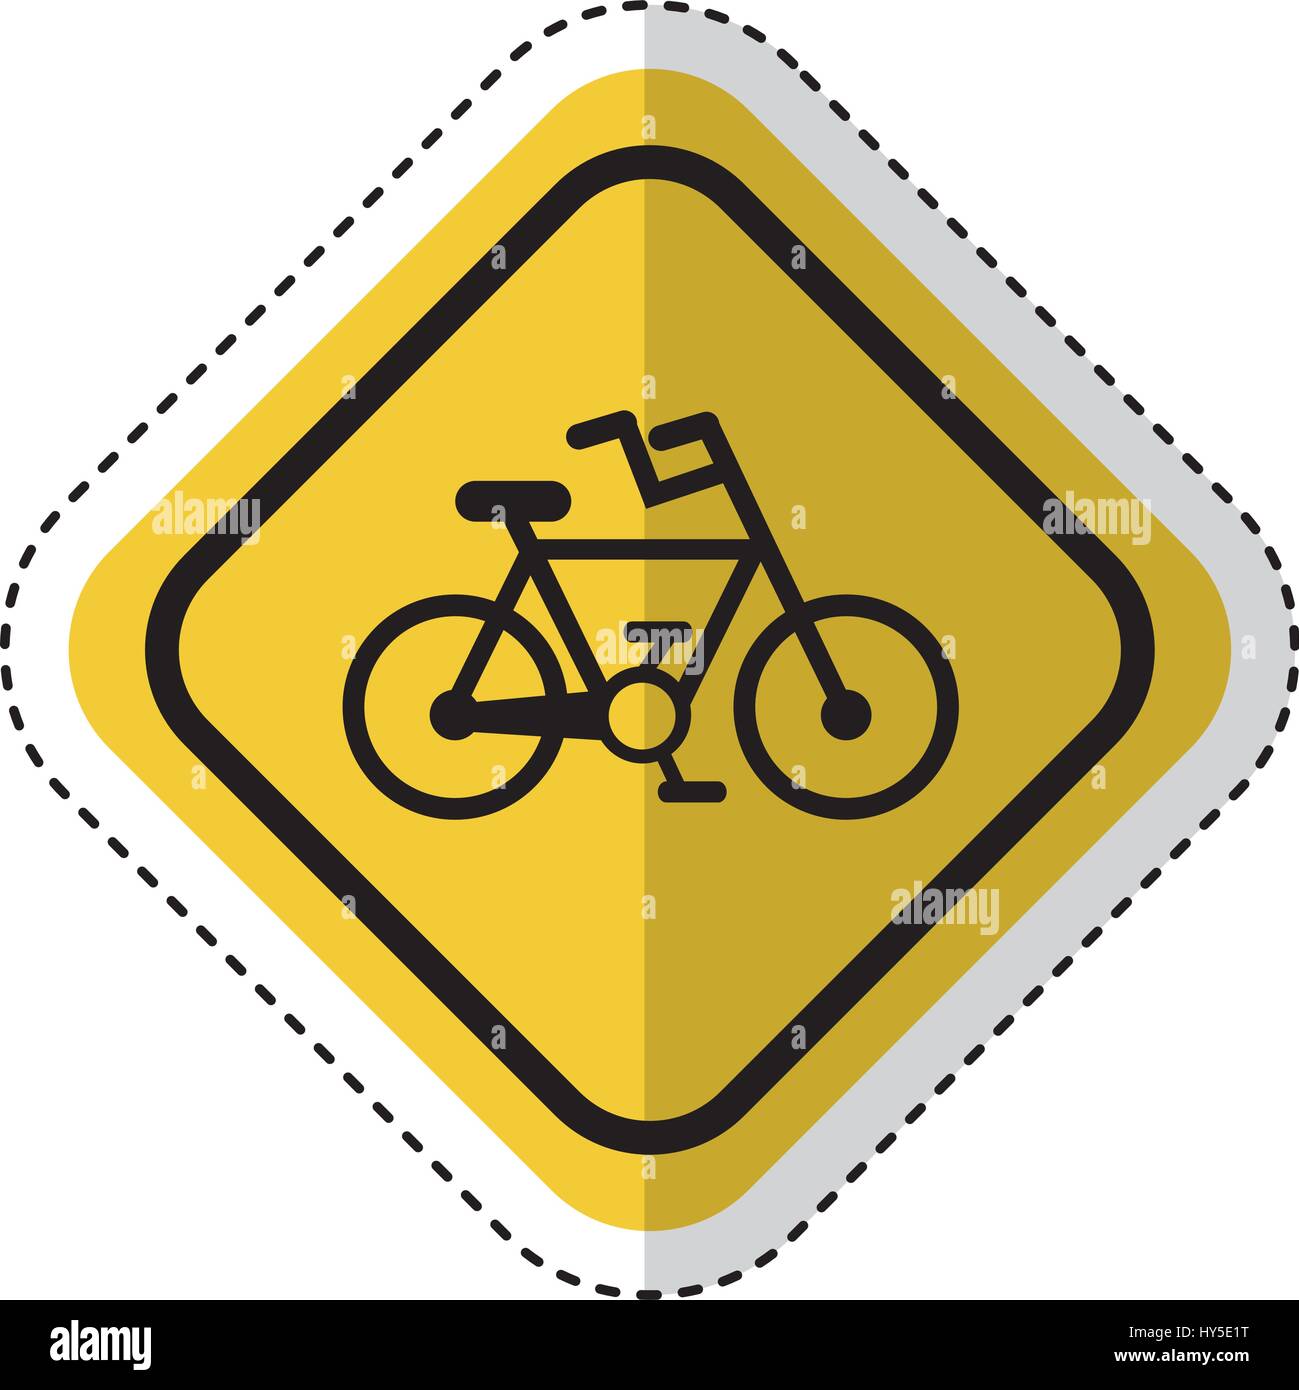 traffic signal with bicycle vehicle isolated icon vector illustration design Stock Vector